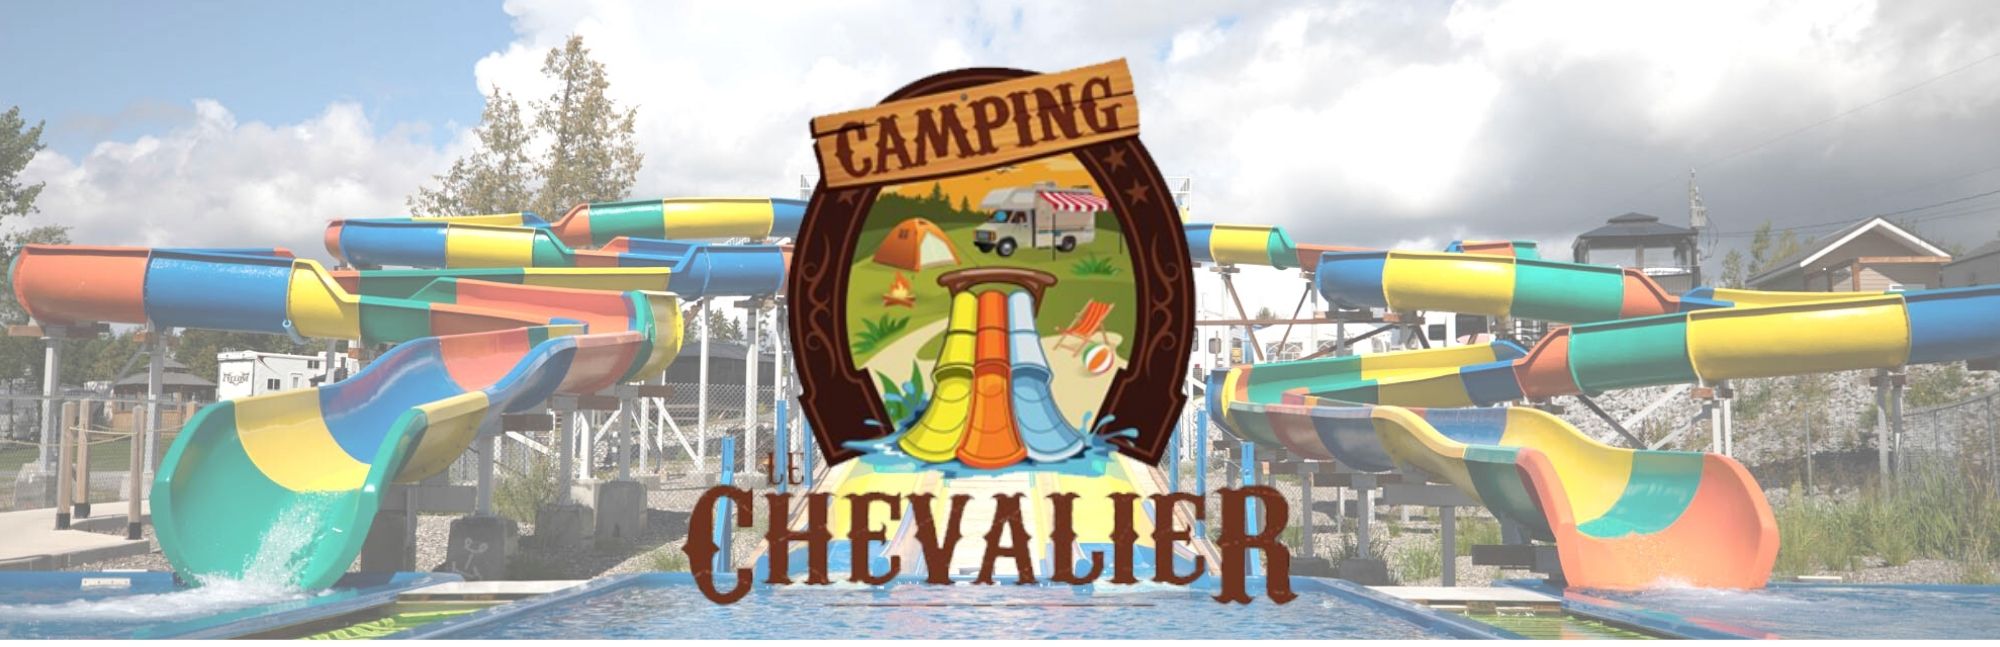 Camping Chevalier Guadeloupe